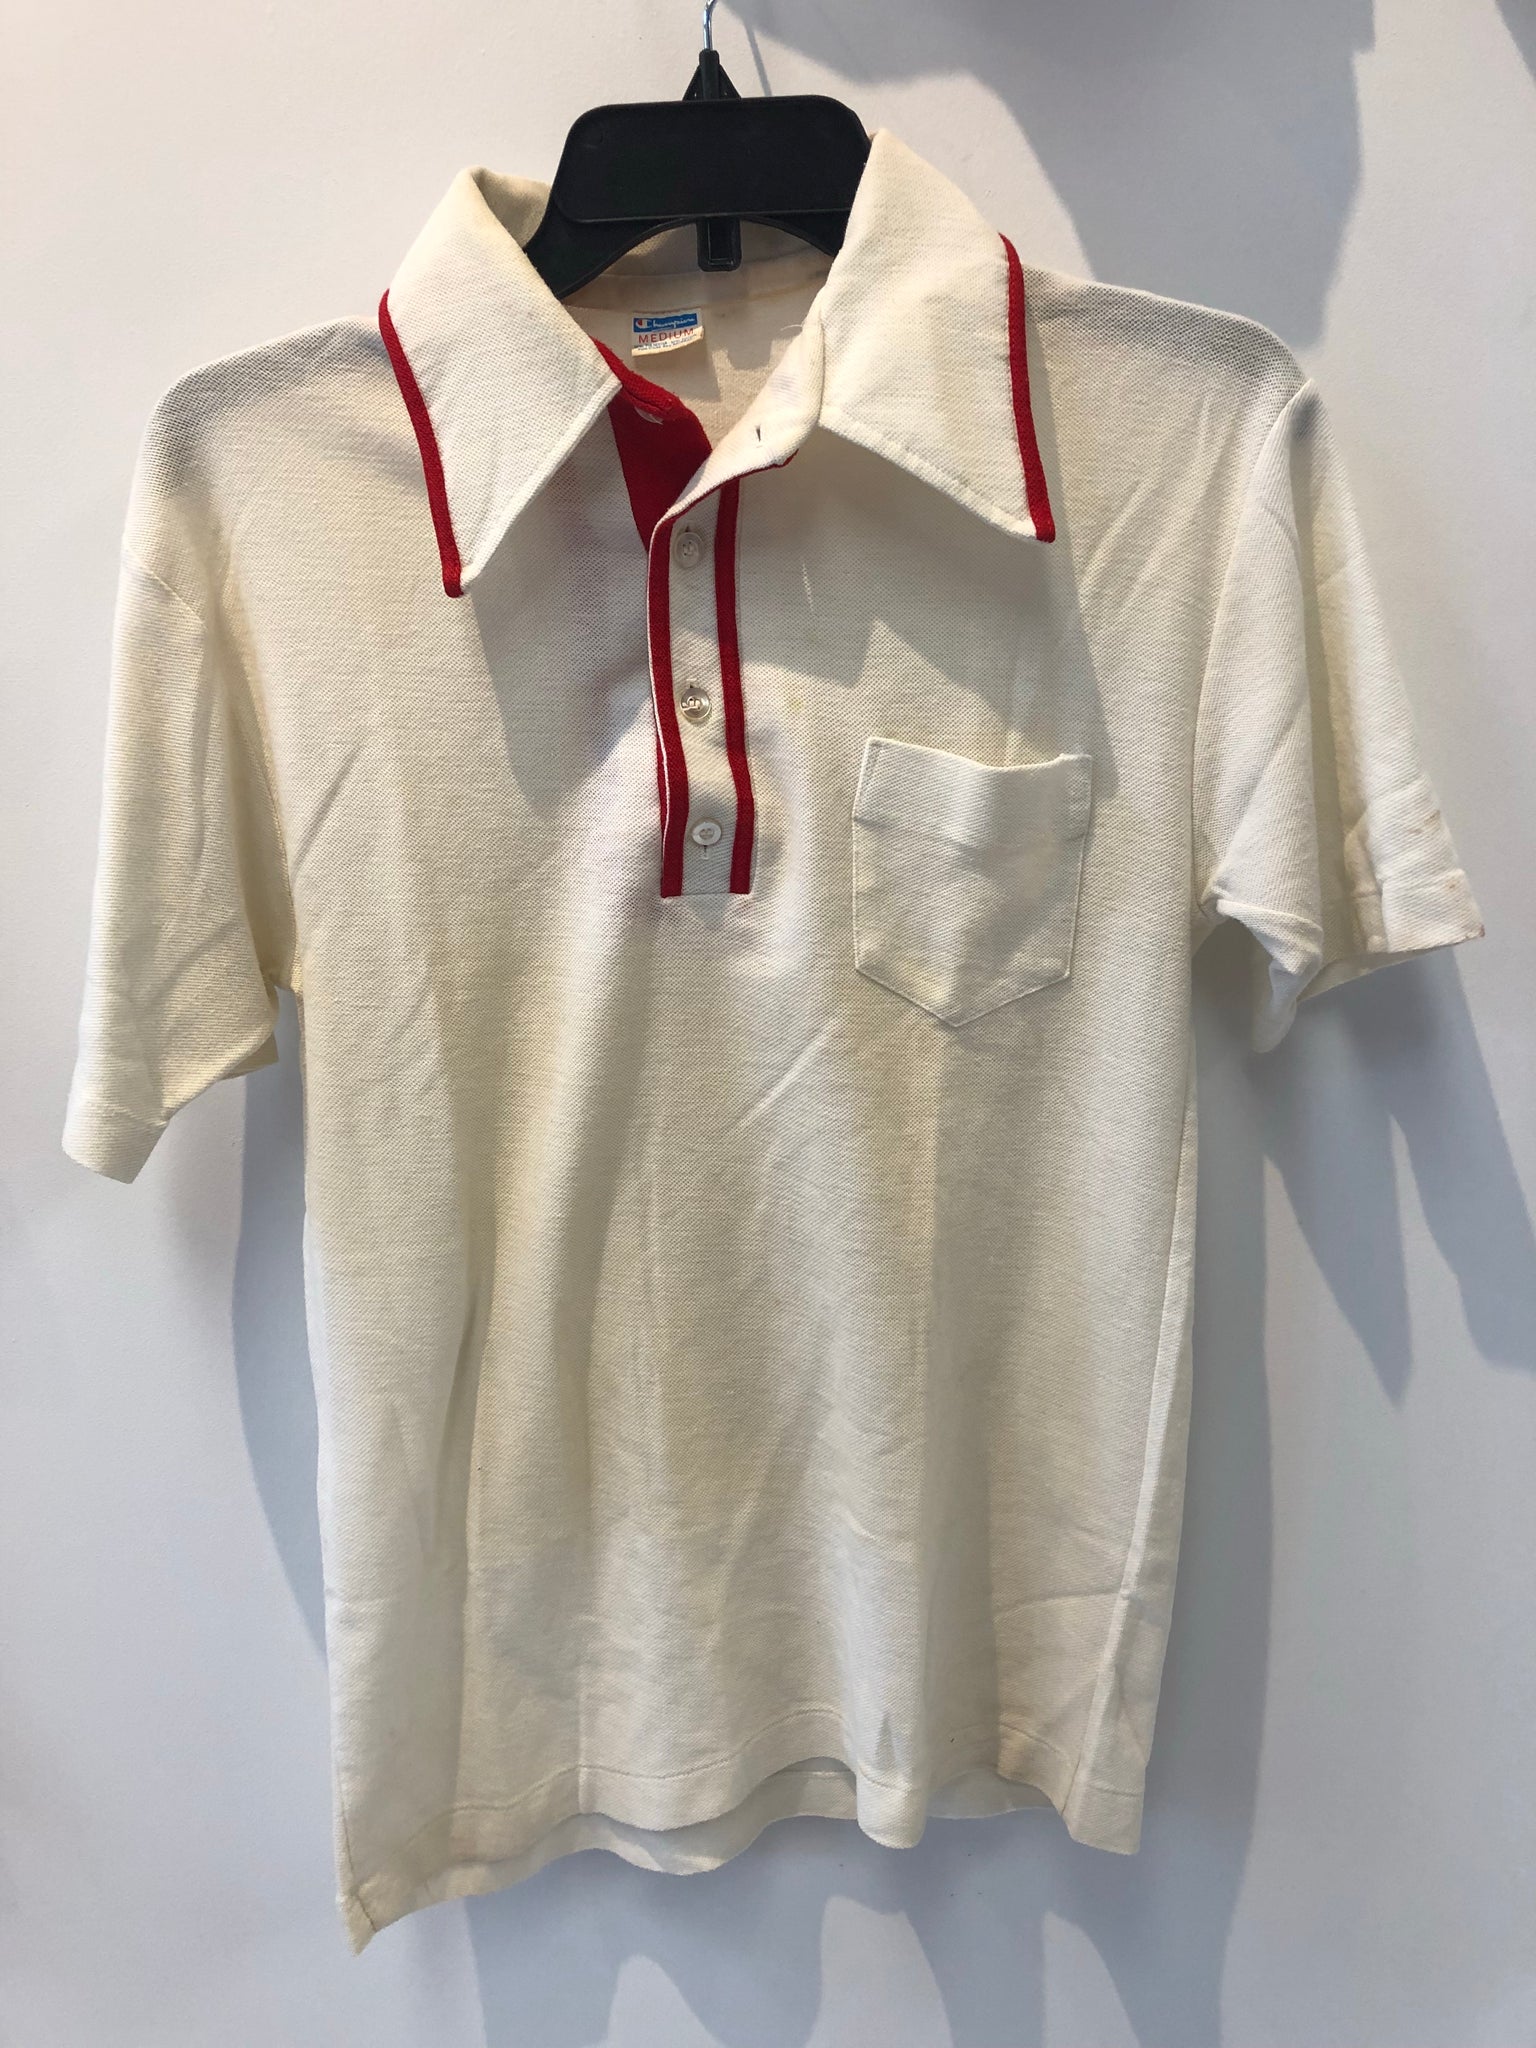 Vintage Champion White Tag S/S Polo Made in USA Fits a Small